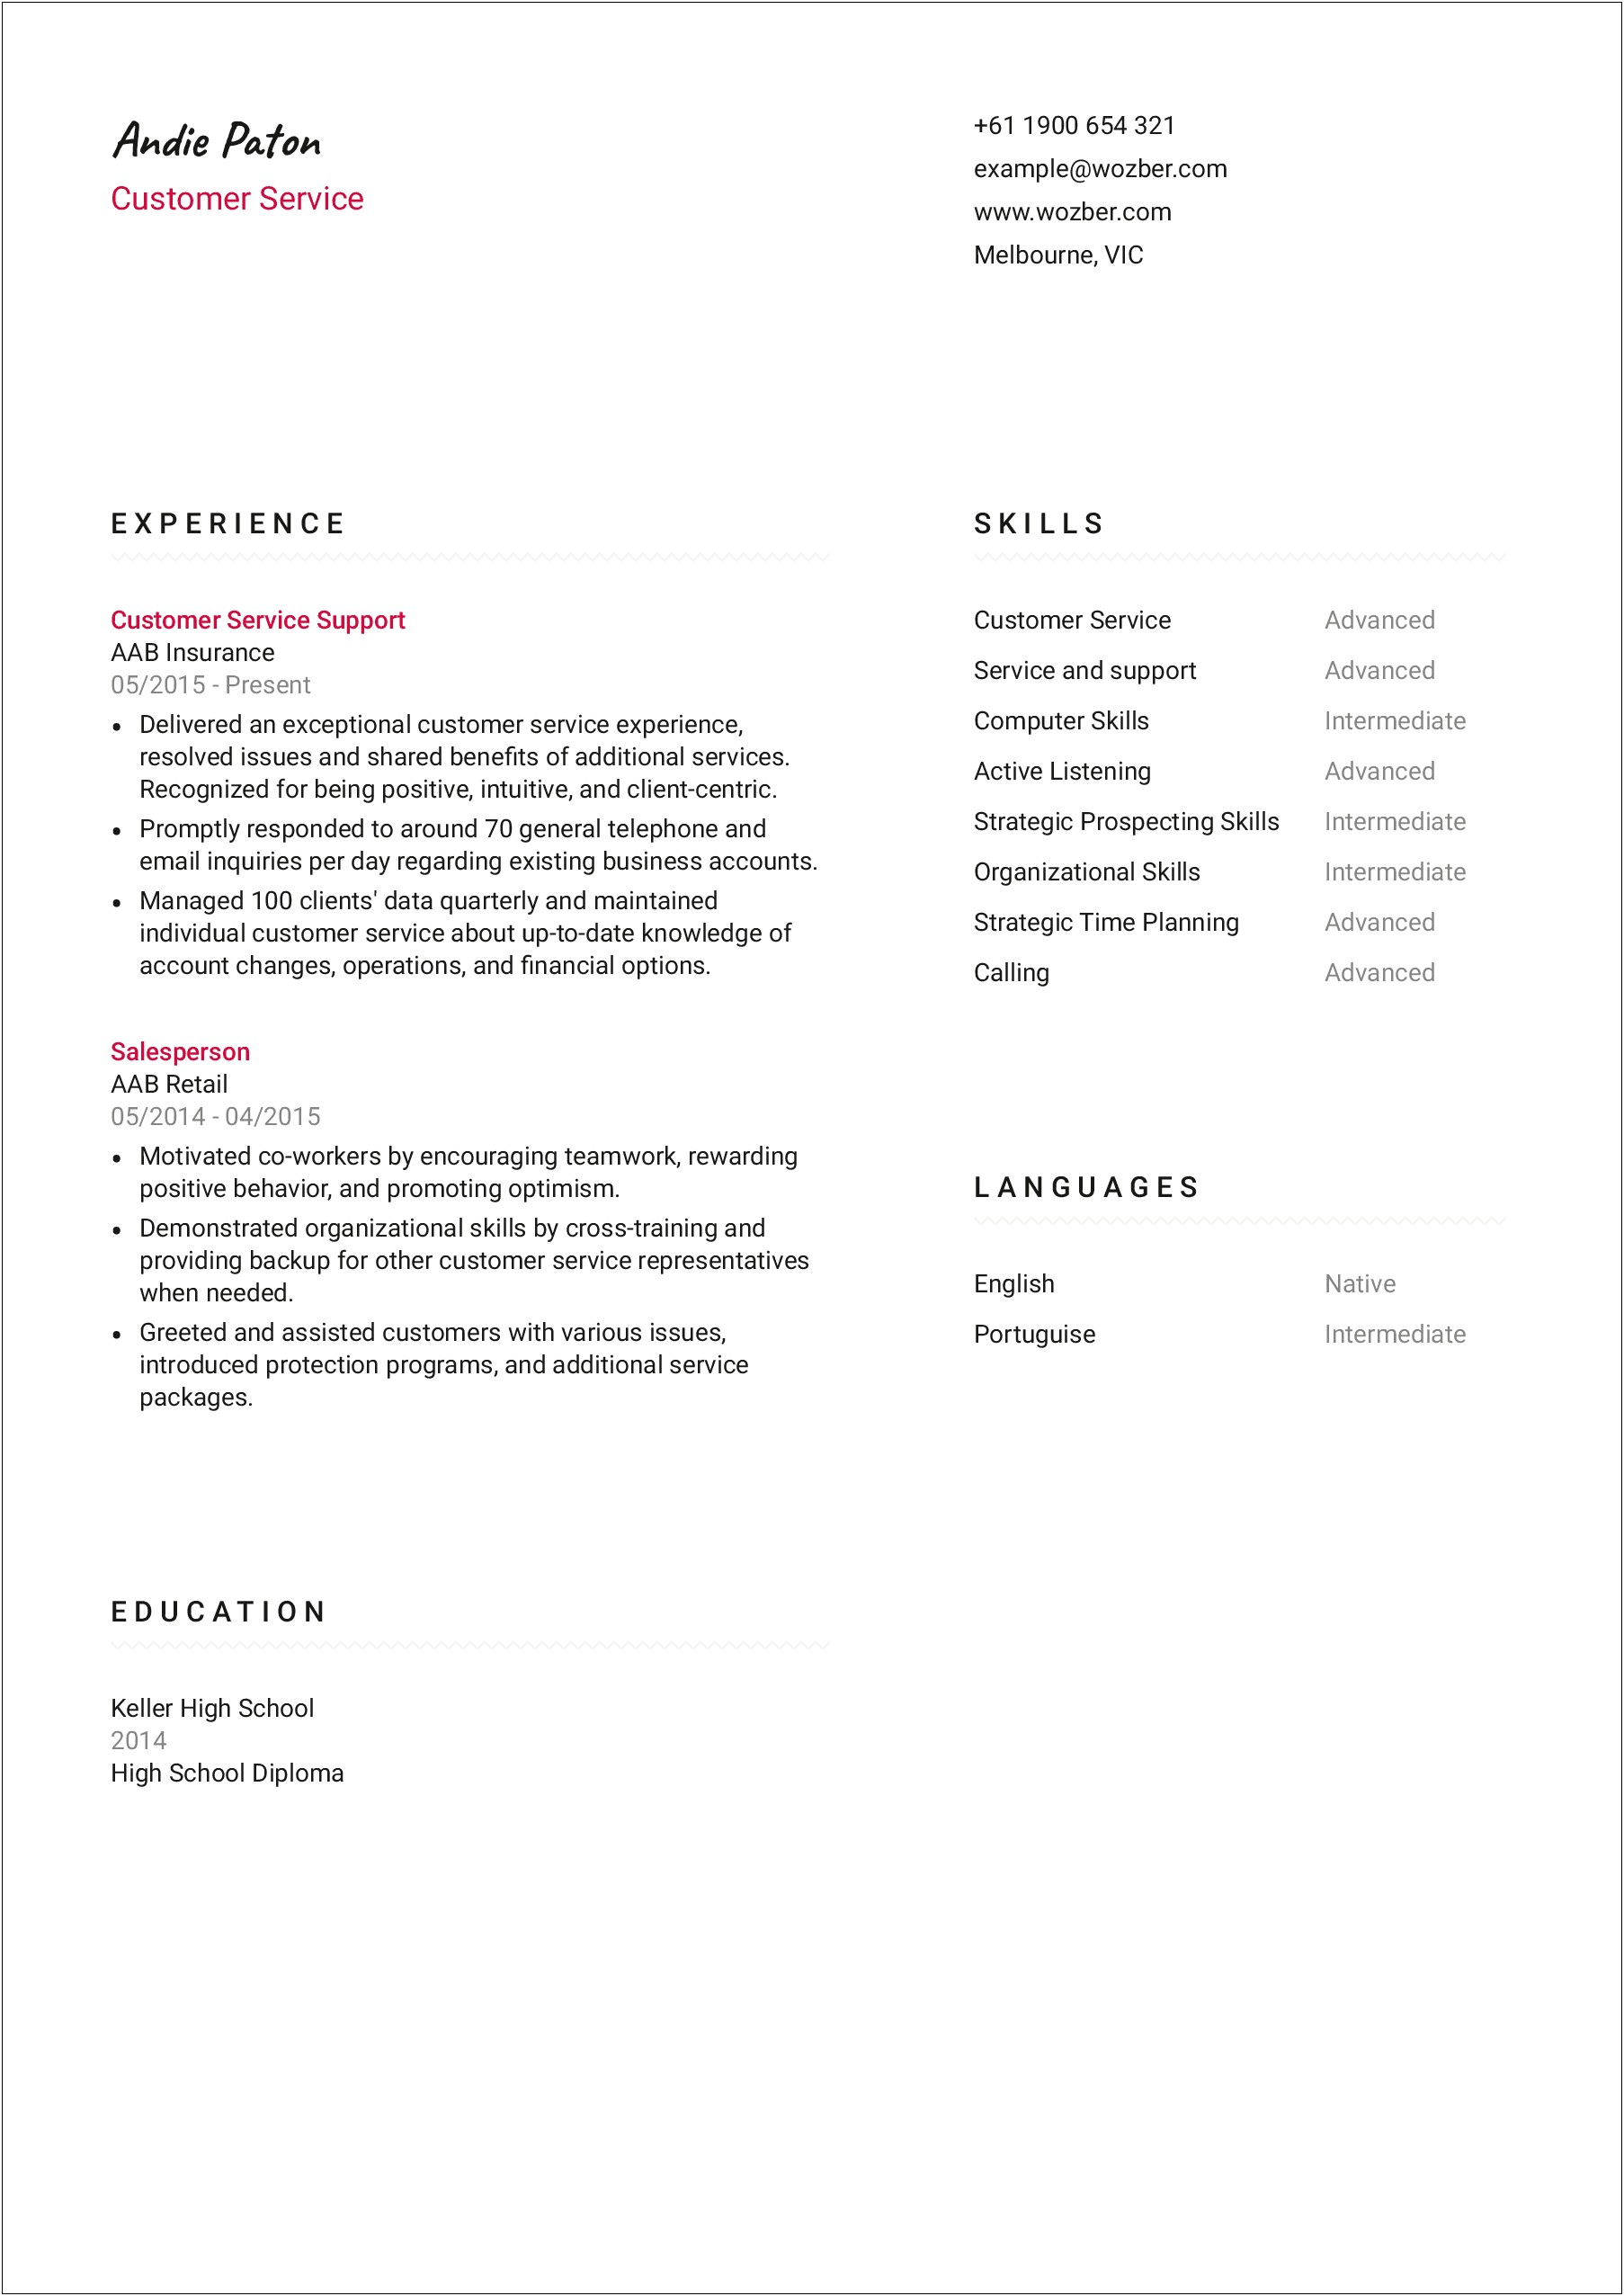 Sample Qualifications For Customer Service Resume